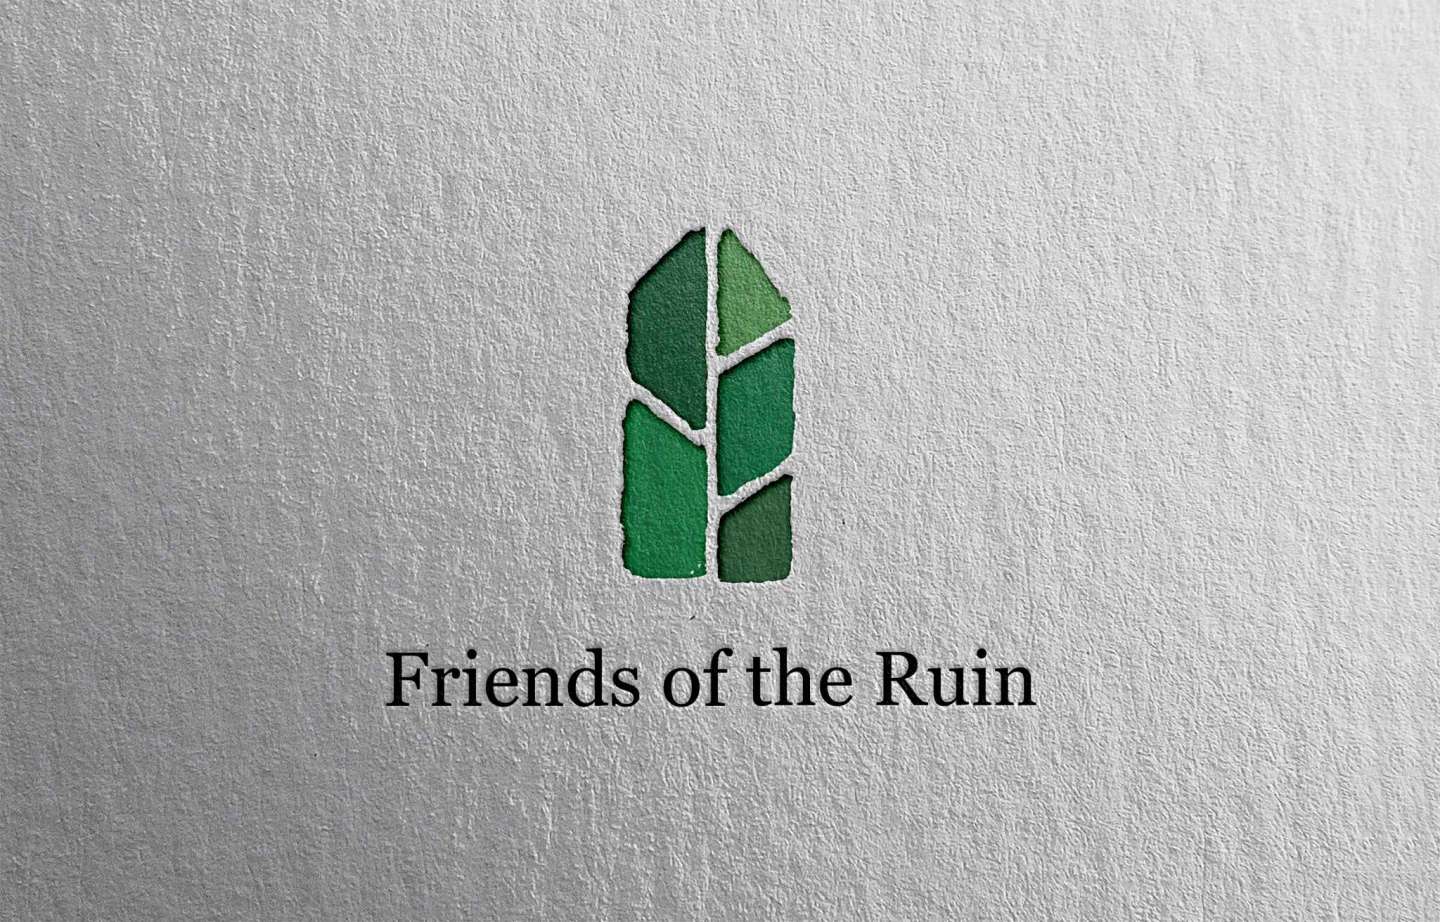 The Ruin and Friends of the Ruin